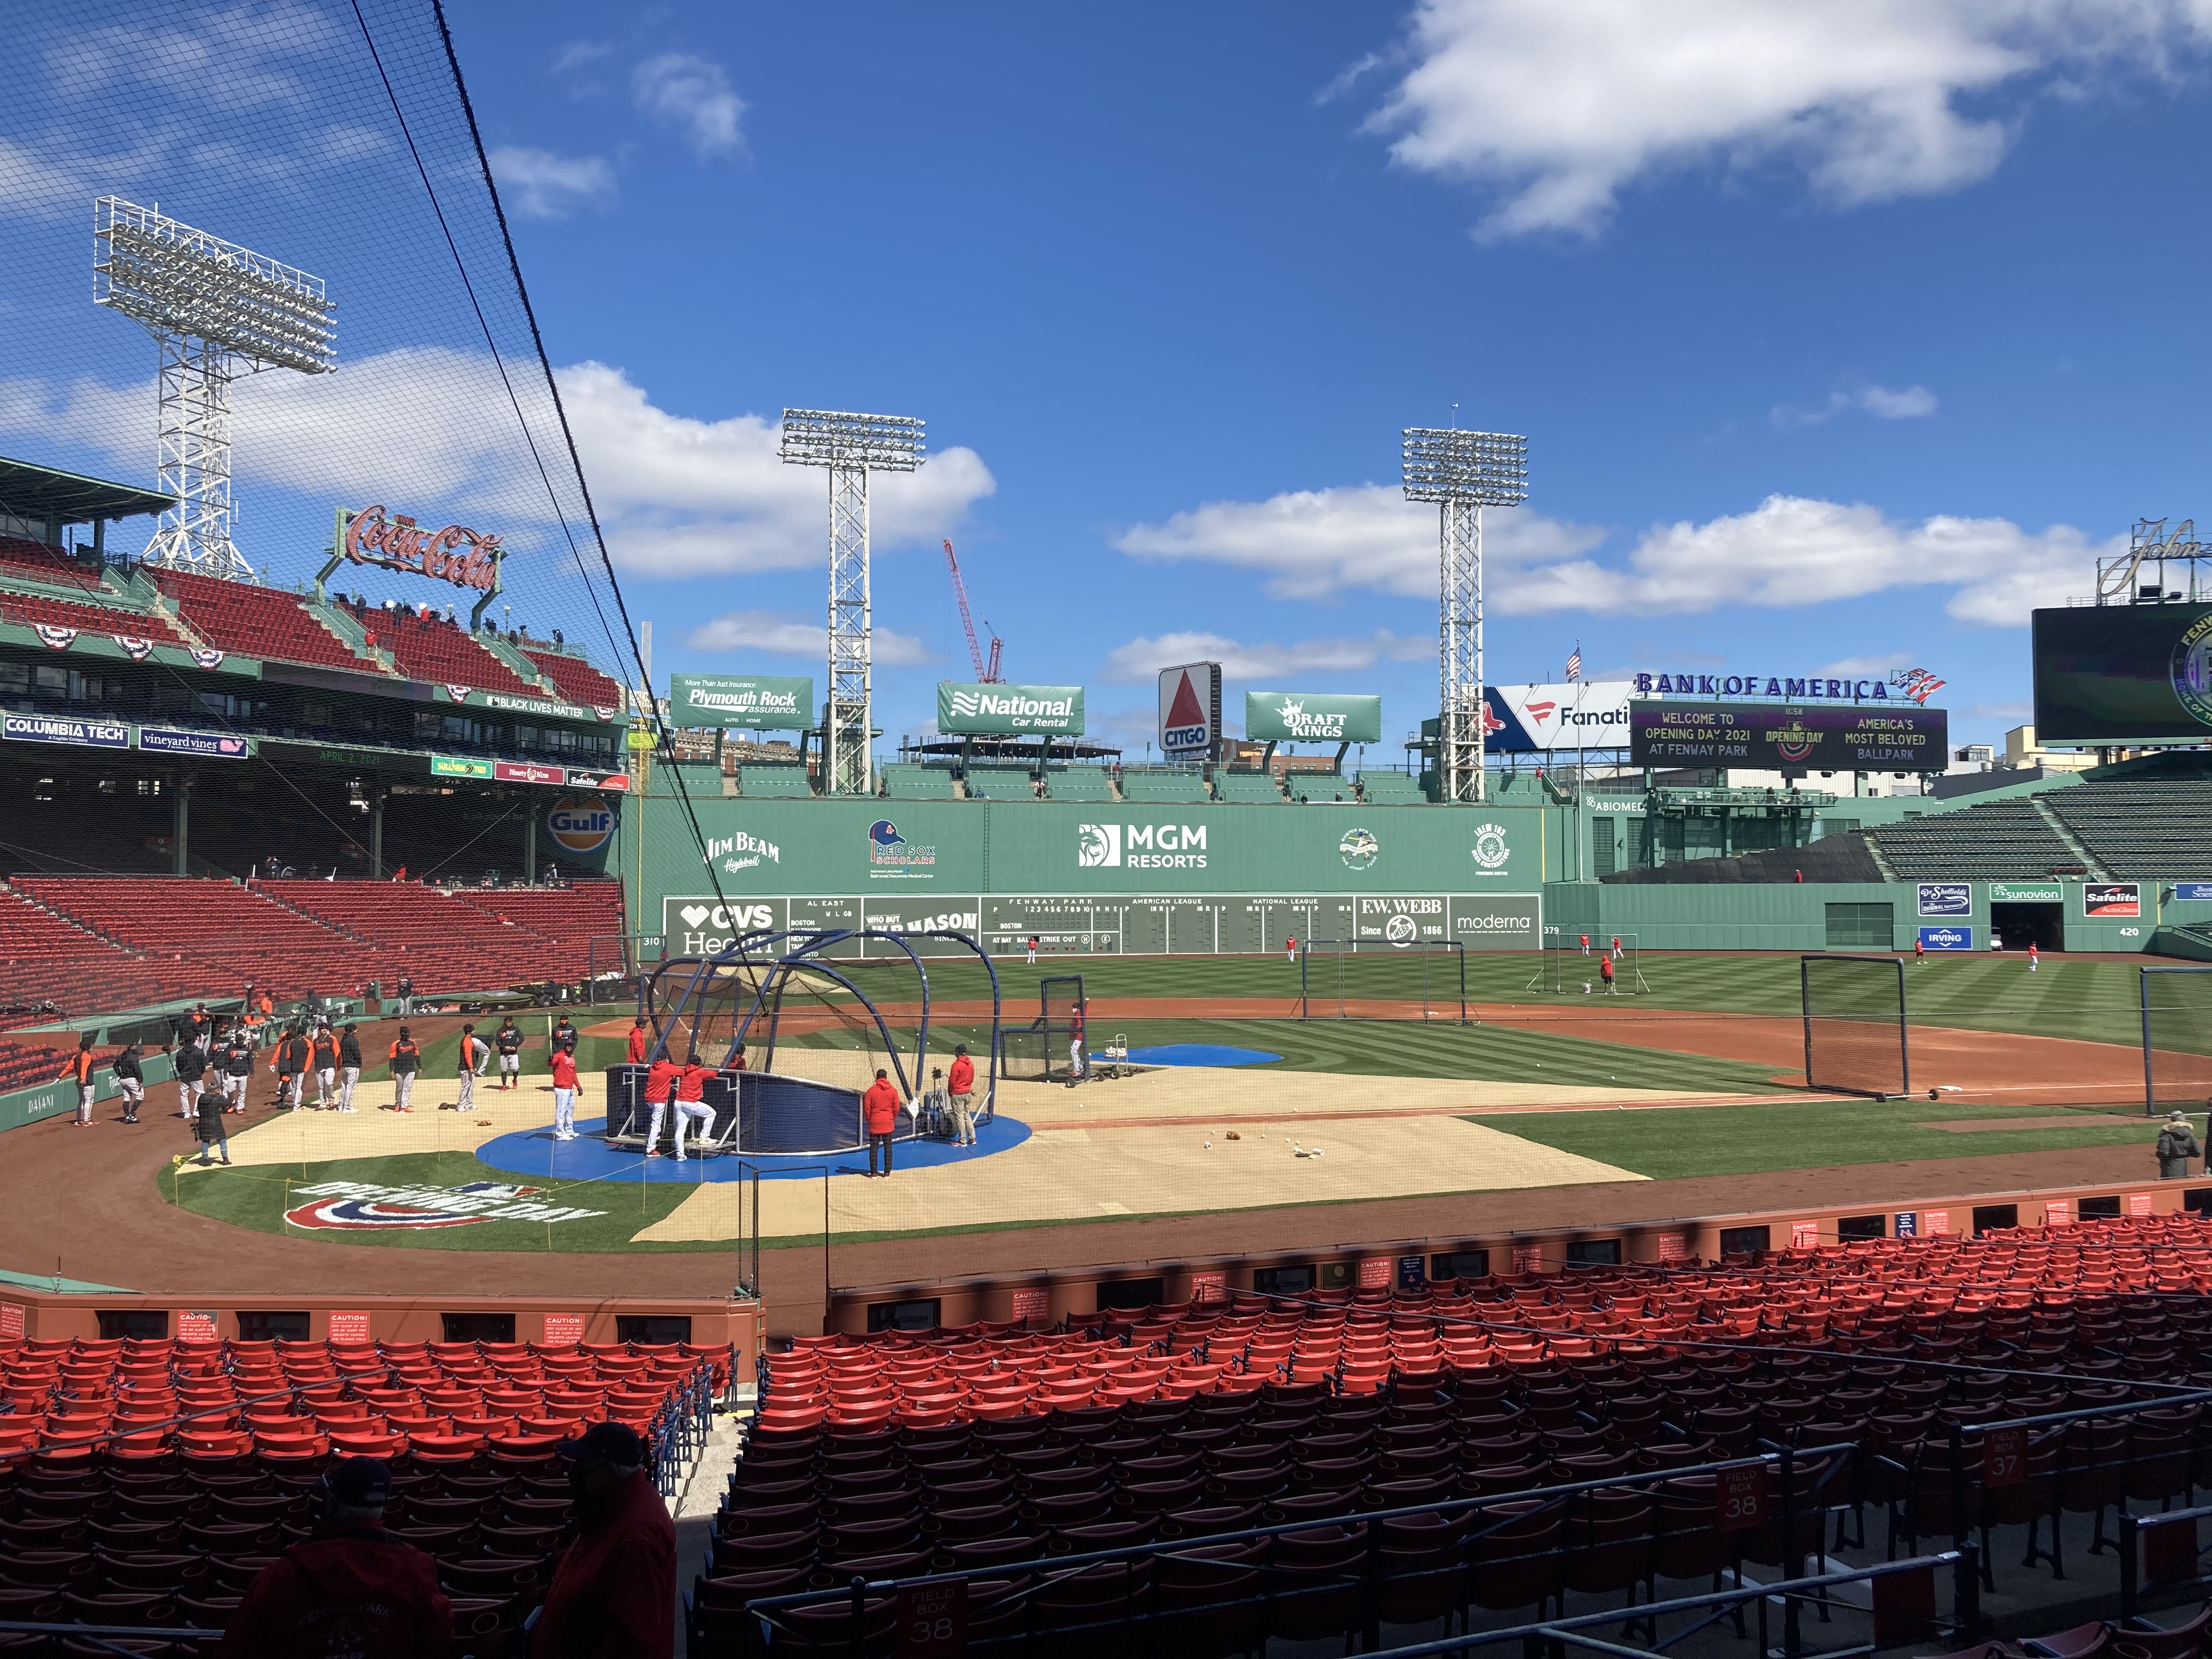 Your Guide To Fenway Park, Home Of The Boston Red Sox - CBS Boston